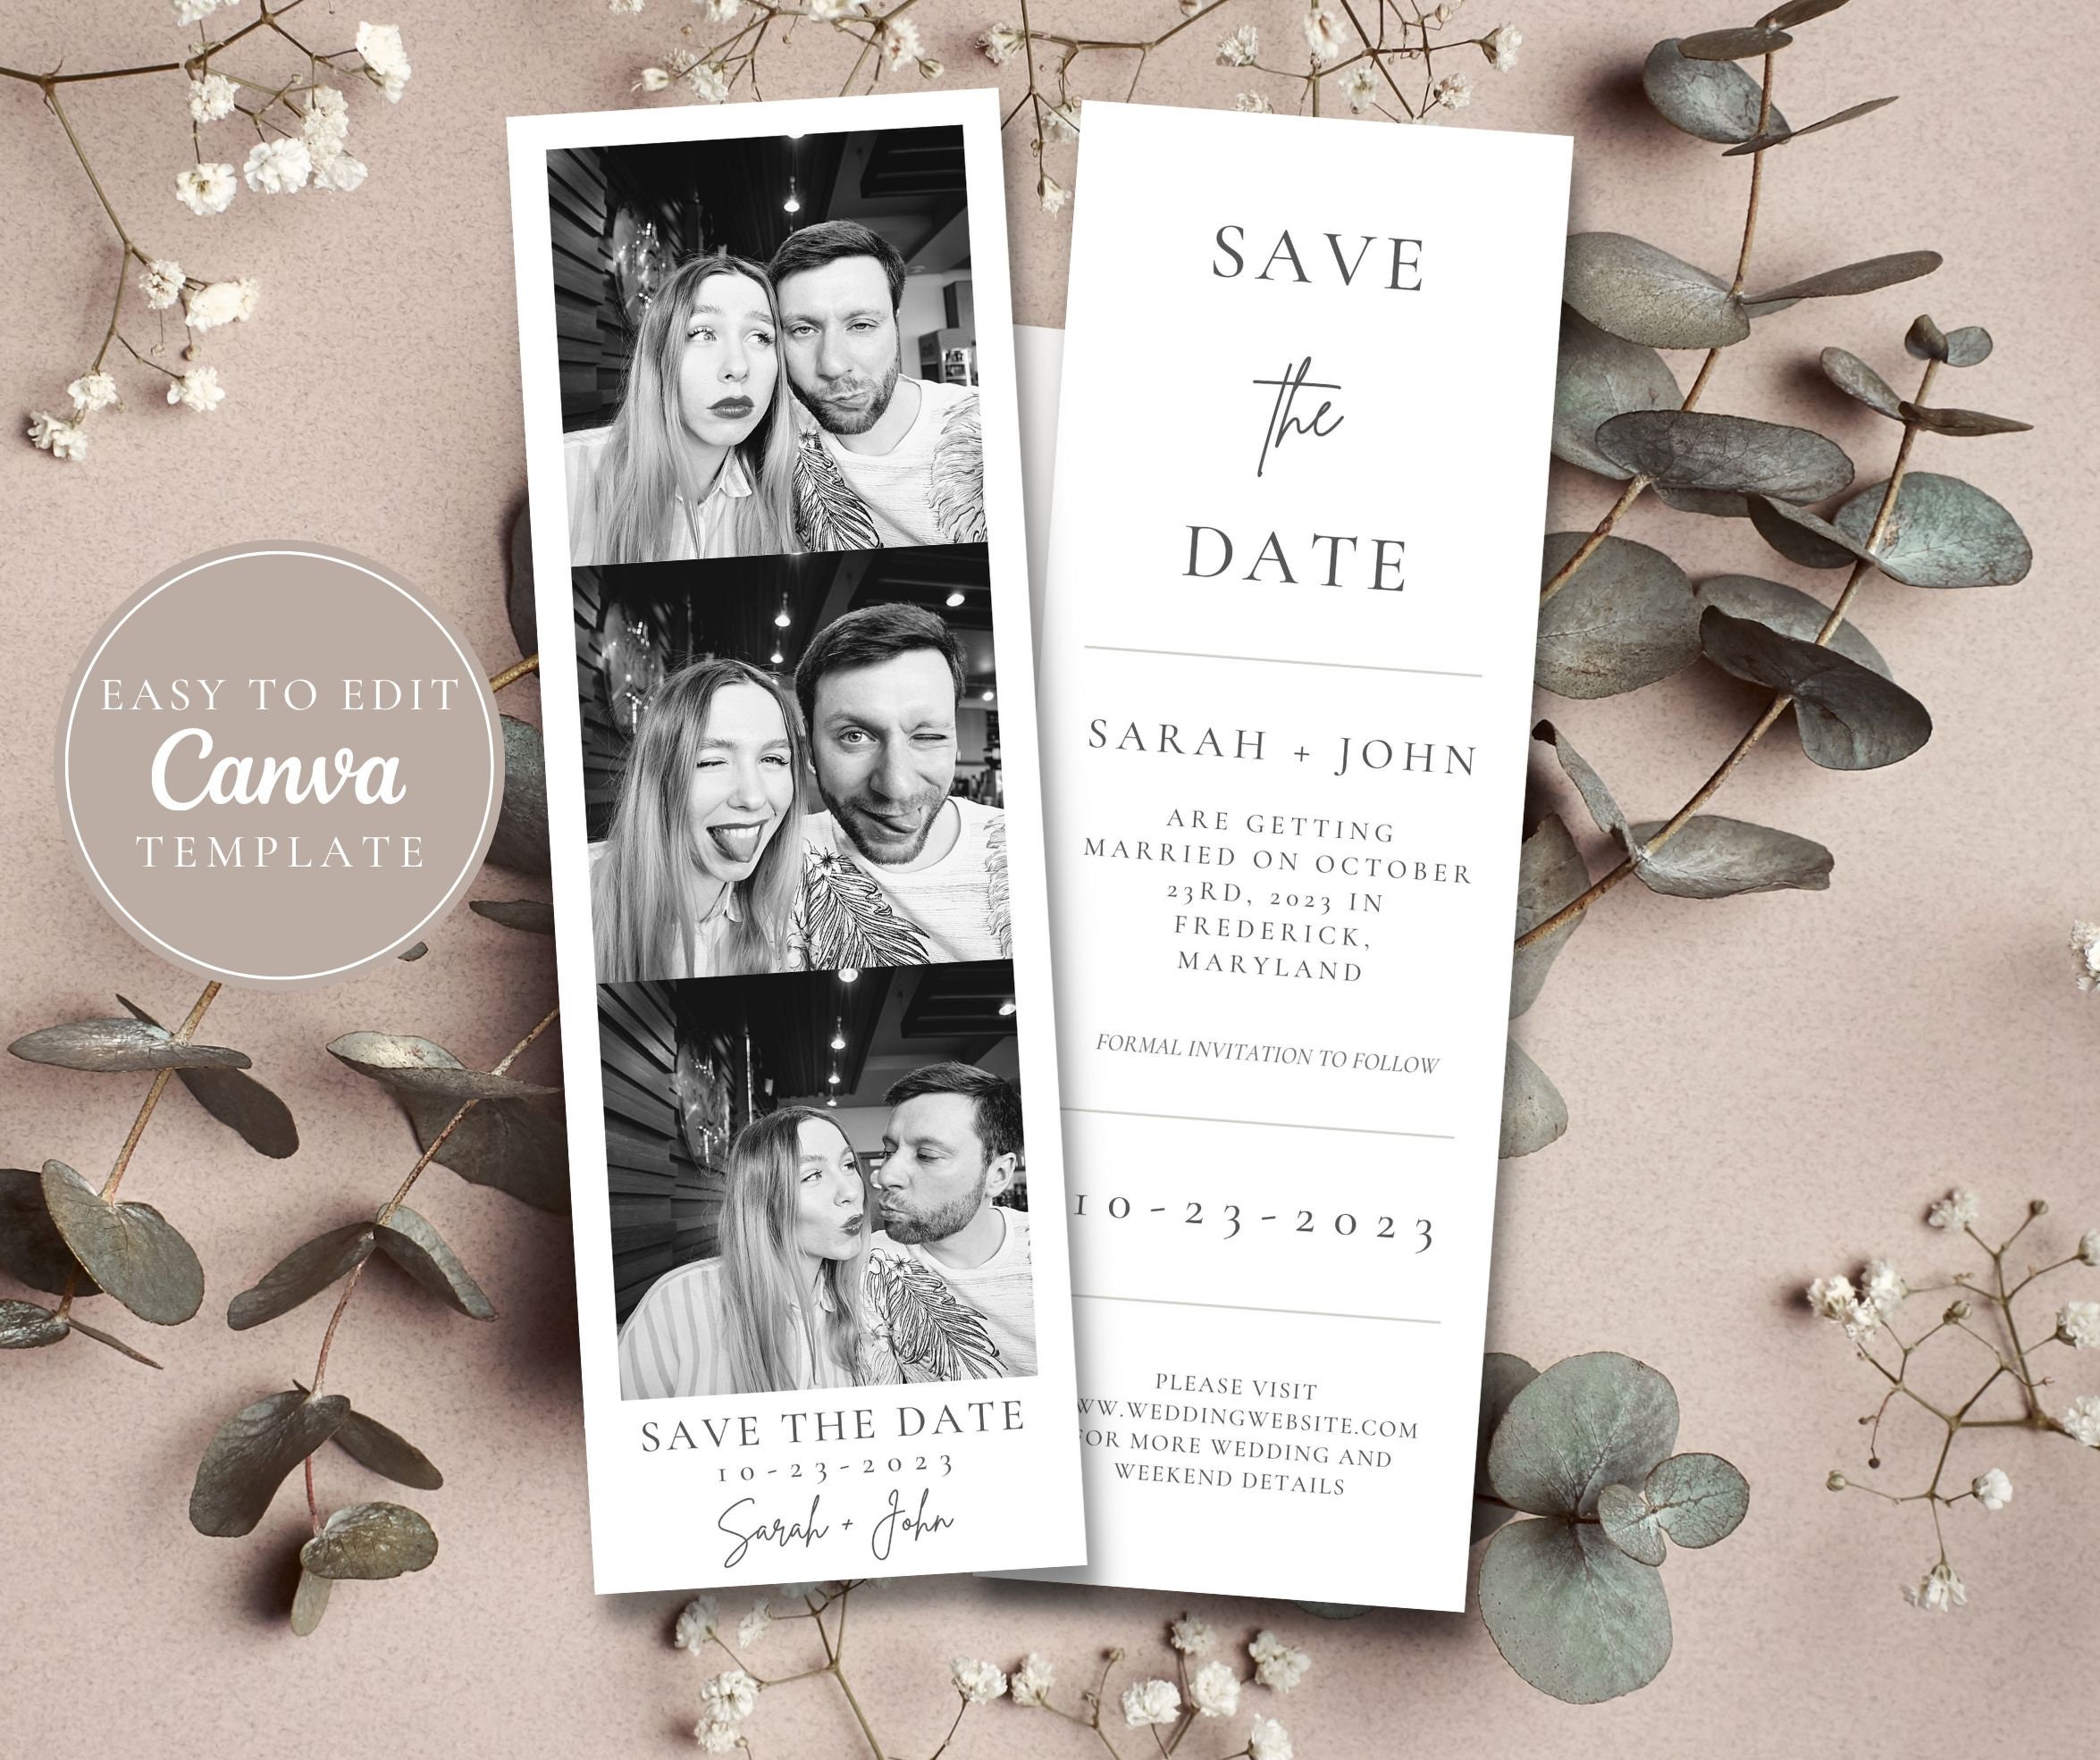 Classic Photo Booth Save The Date Cards By Basic Invite